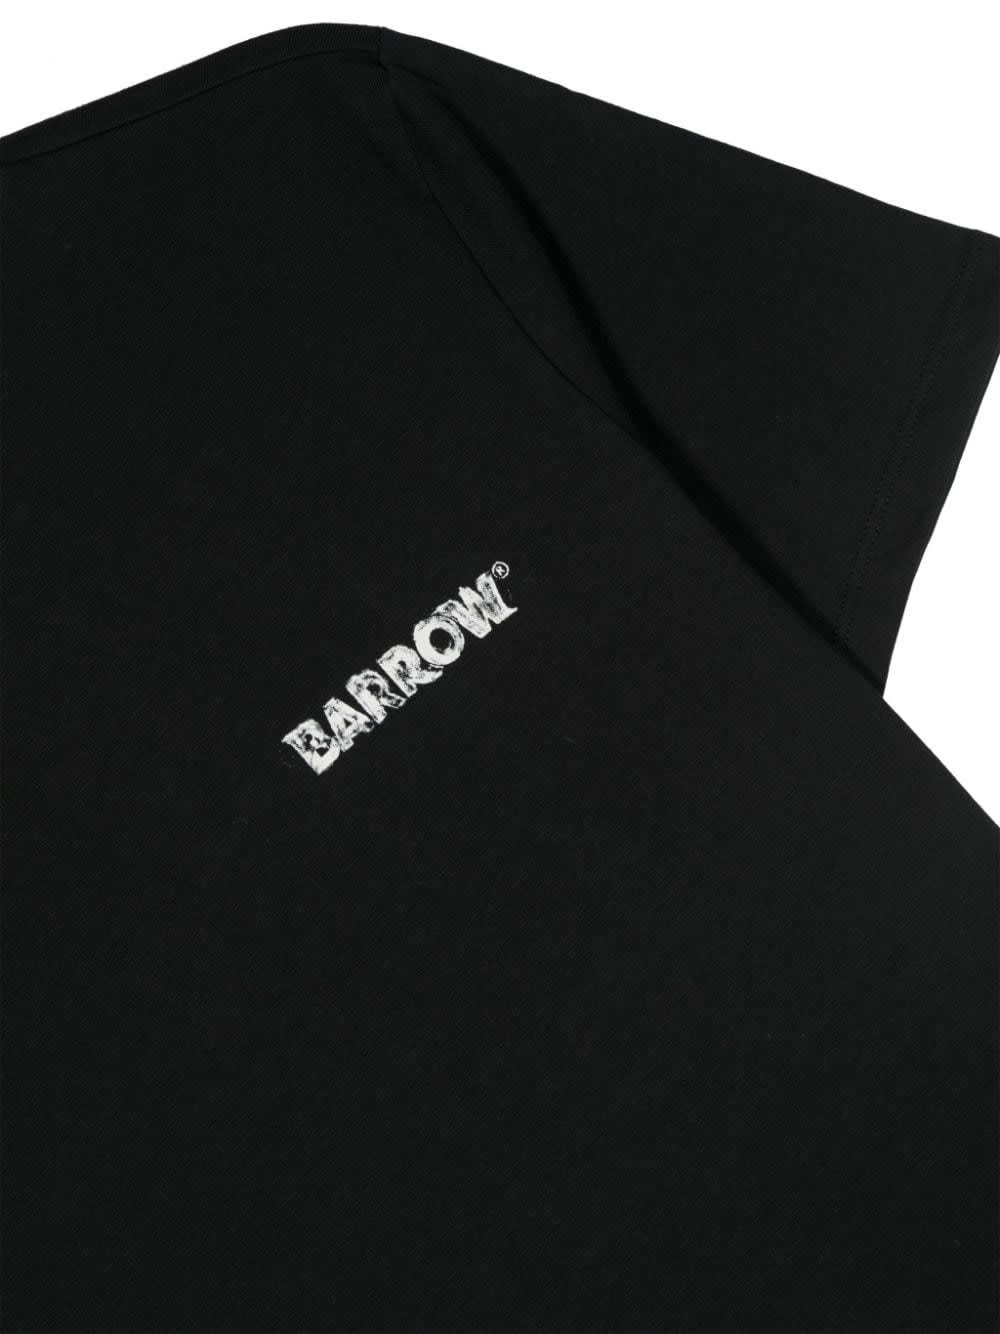 Shop Barrow Black T-shirt With Logo And Graphics In Nero/black